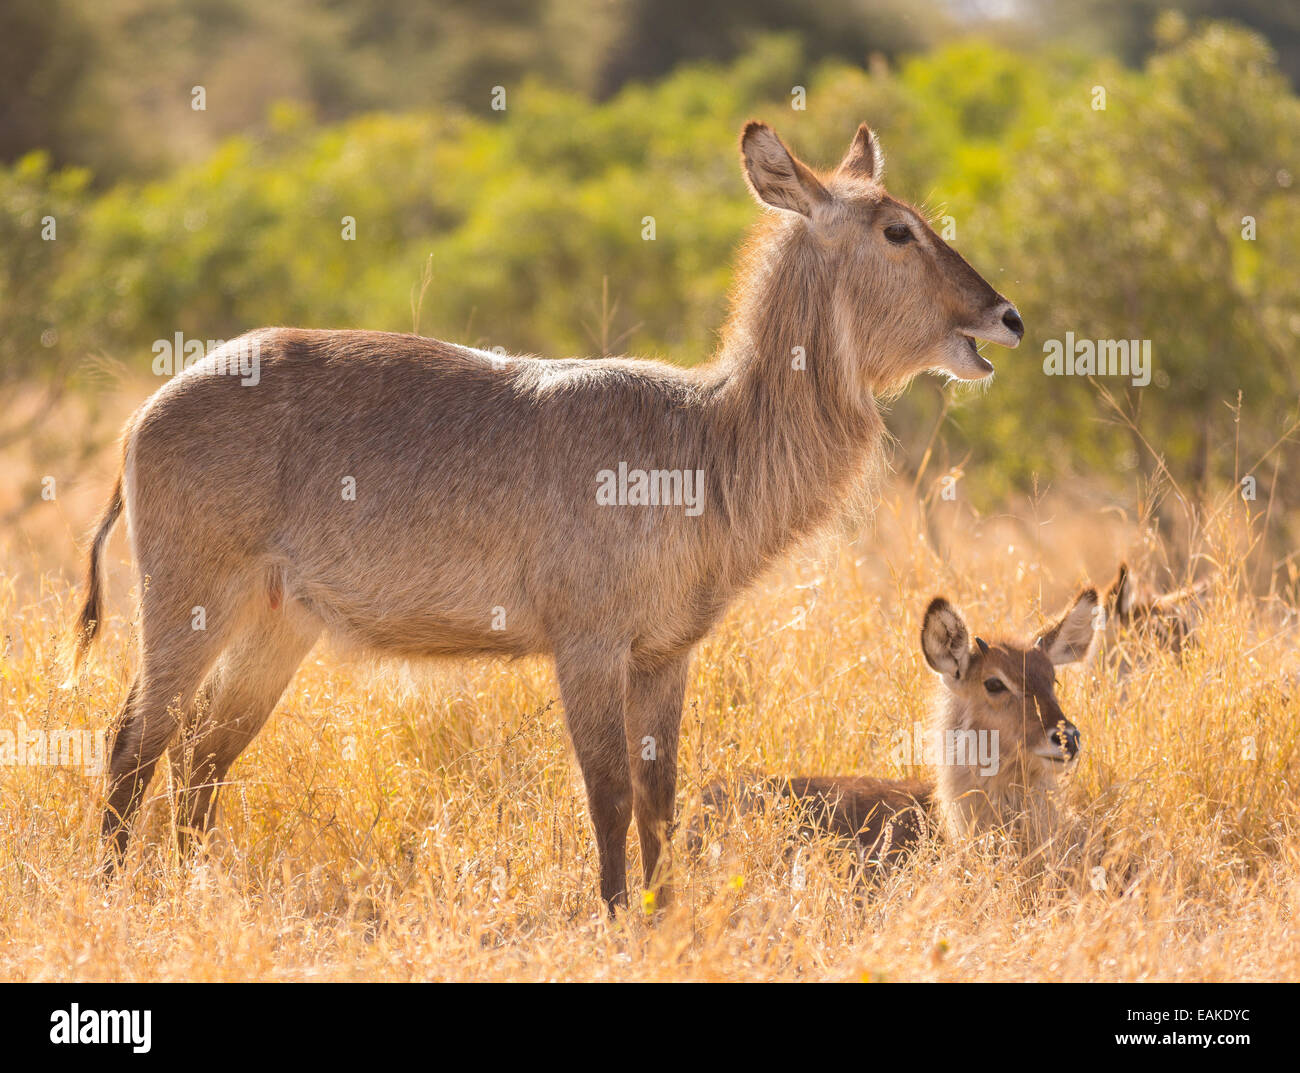 KRUGER NATIONAL PARK, SOUTH AFRICA - Waterbuck Stock Photo